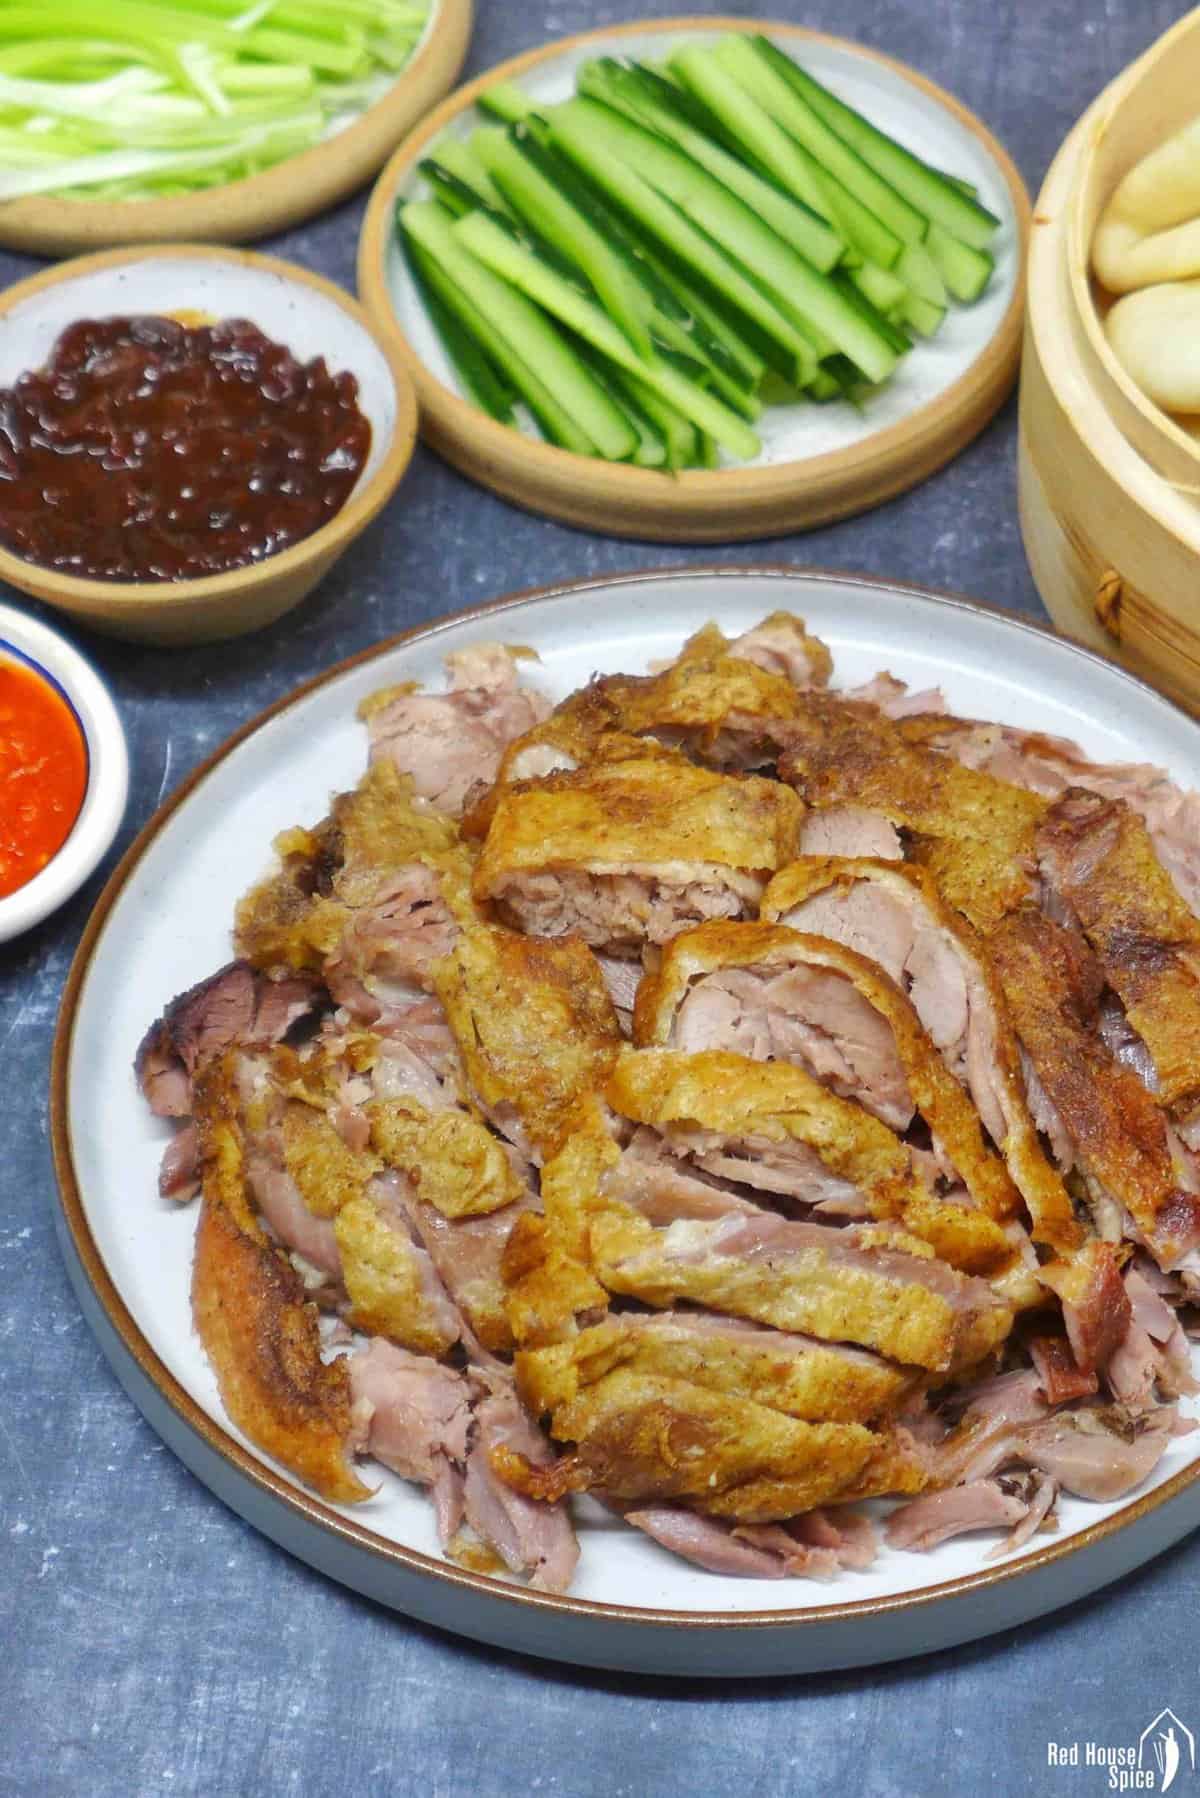 A plate of aromatic crispy duck with buns, vegetables and sauces on the side.